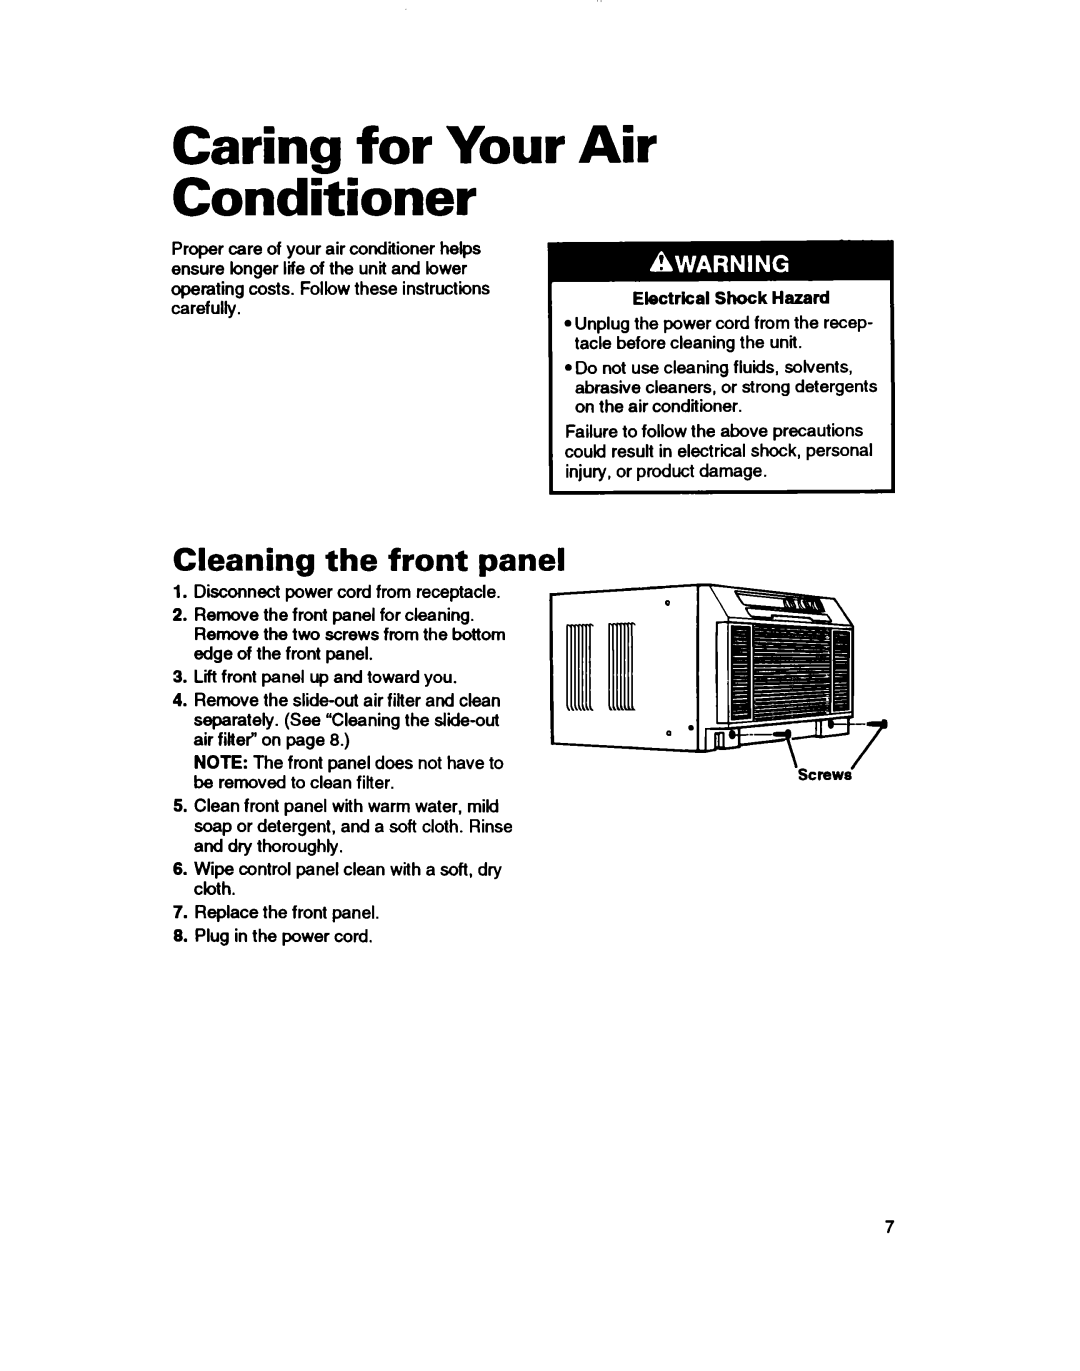 Whirlpool ACU124XD0 warranty Caring for Your Air Conditioner, Cleaning the front panel 